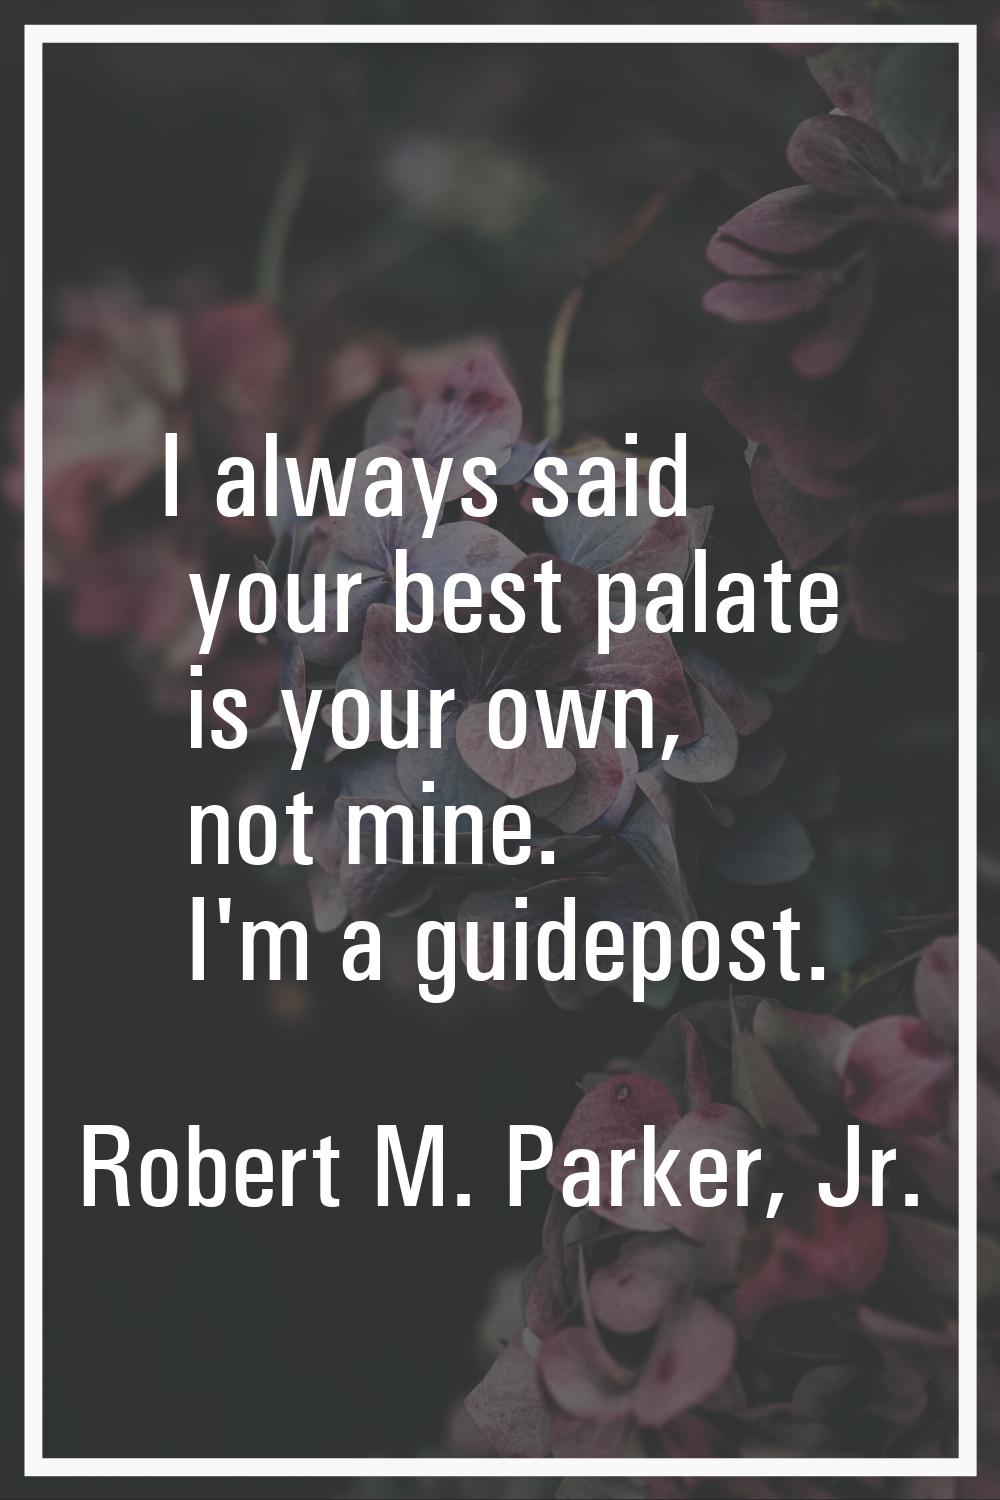 I always said your best palate is your own, not mine. I'm a guidepost.